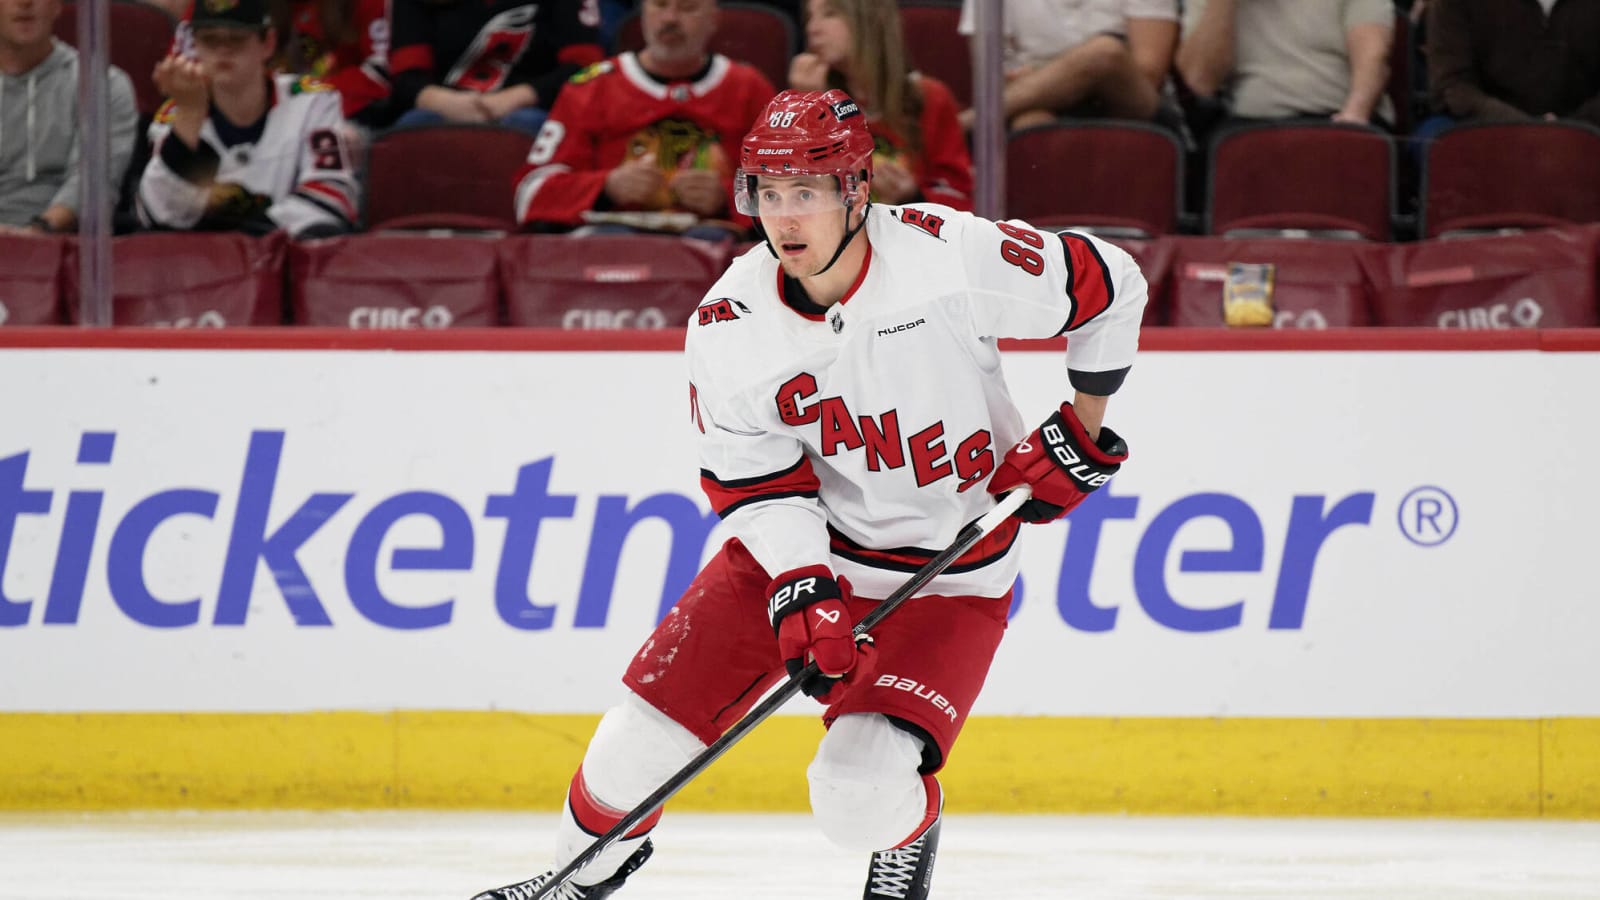 Martin Necas would like to be traded, according to his father